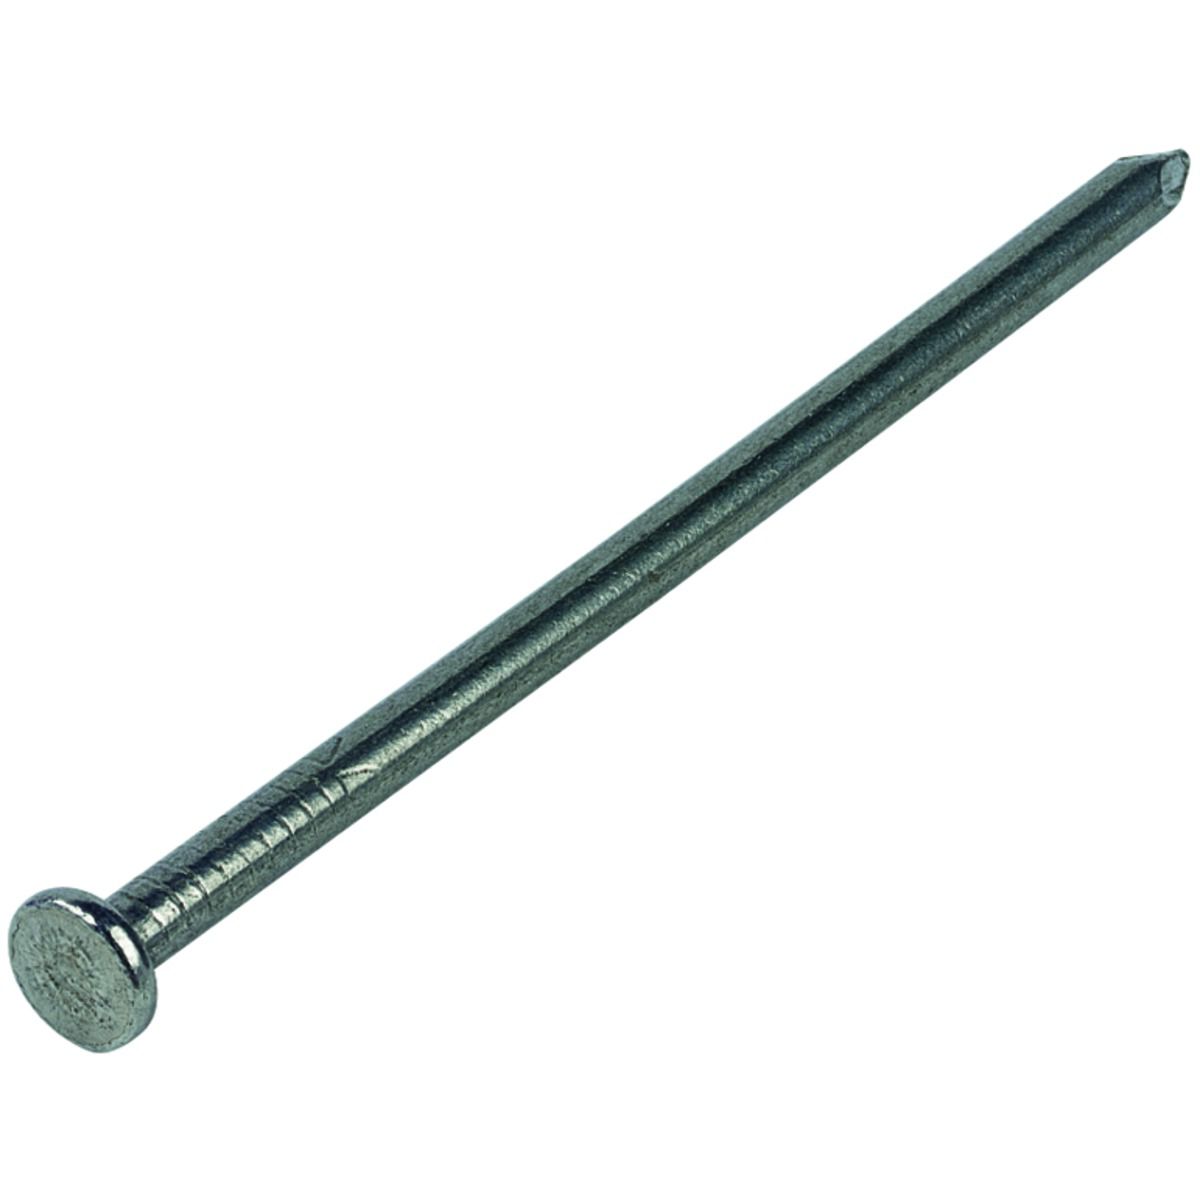 Image of Wickes 25mm Bright Round Wire Nails - 400g